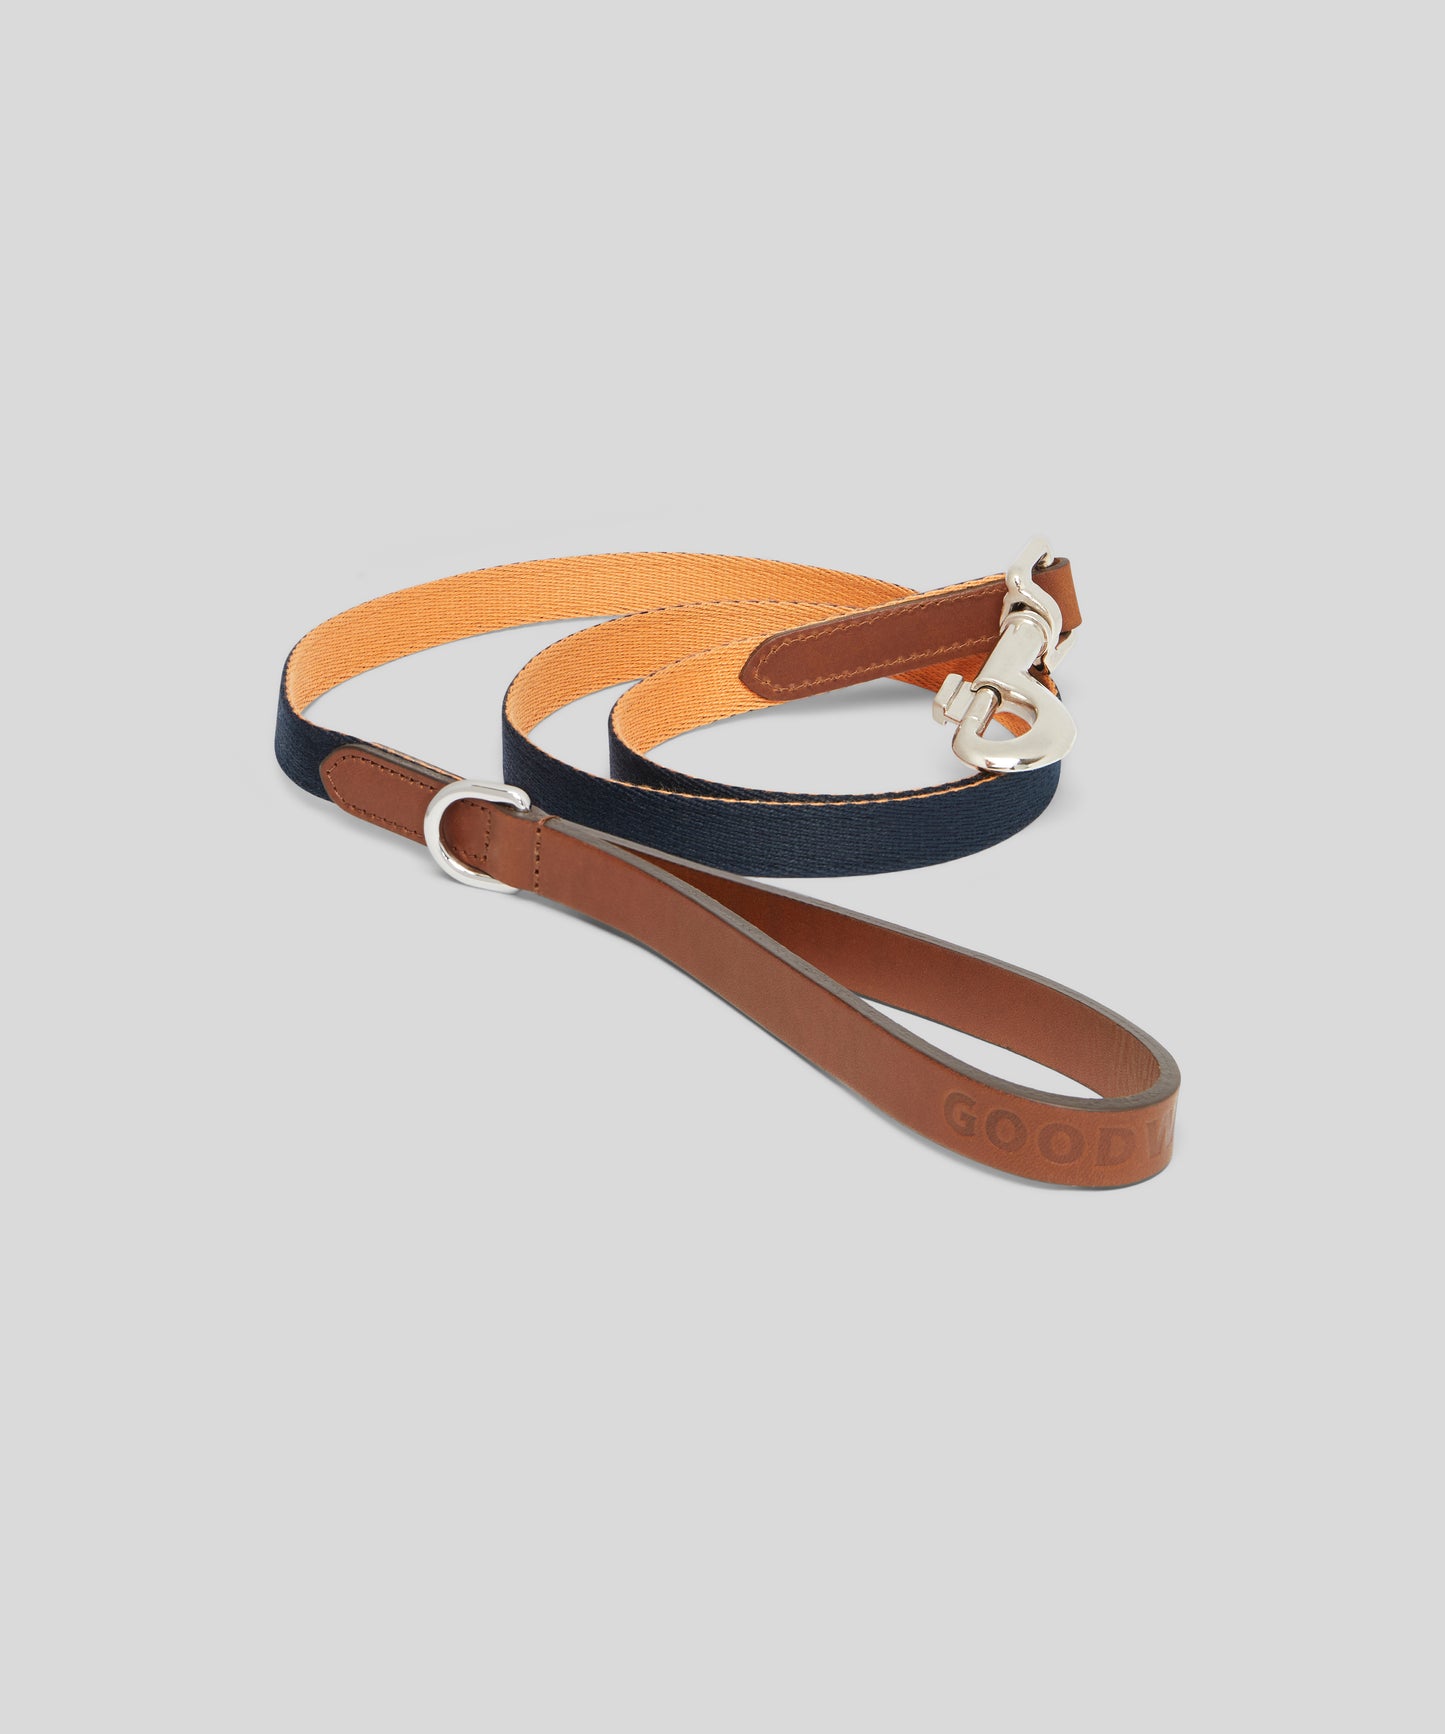 Goodwoof Webbing & Leather Dog Lead